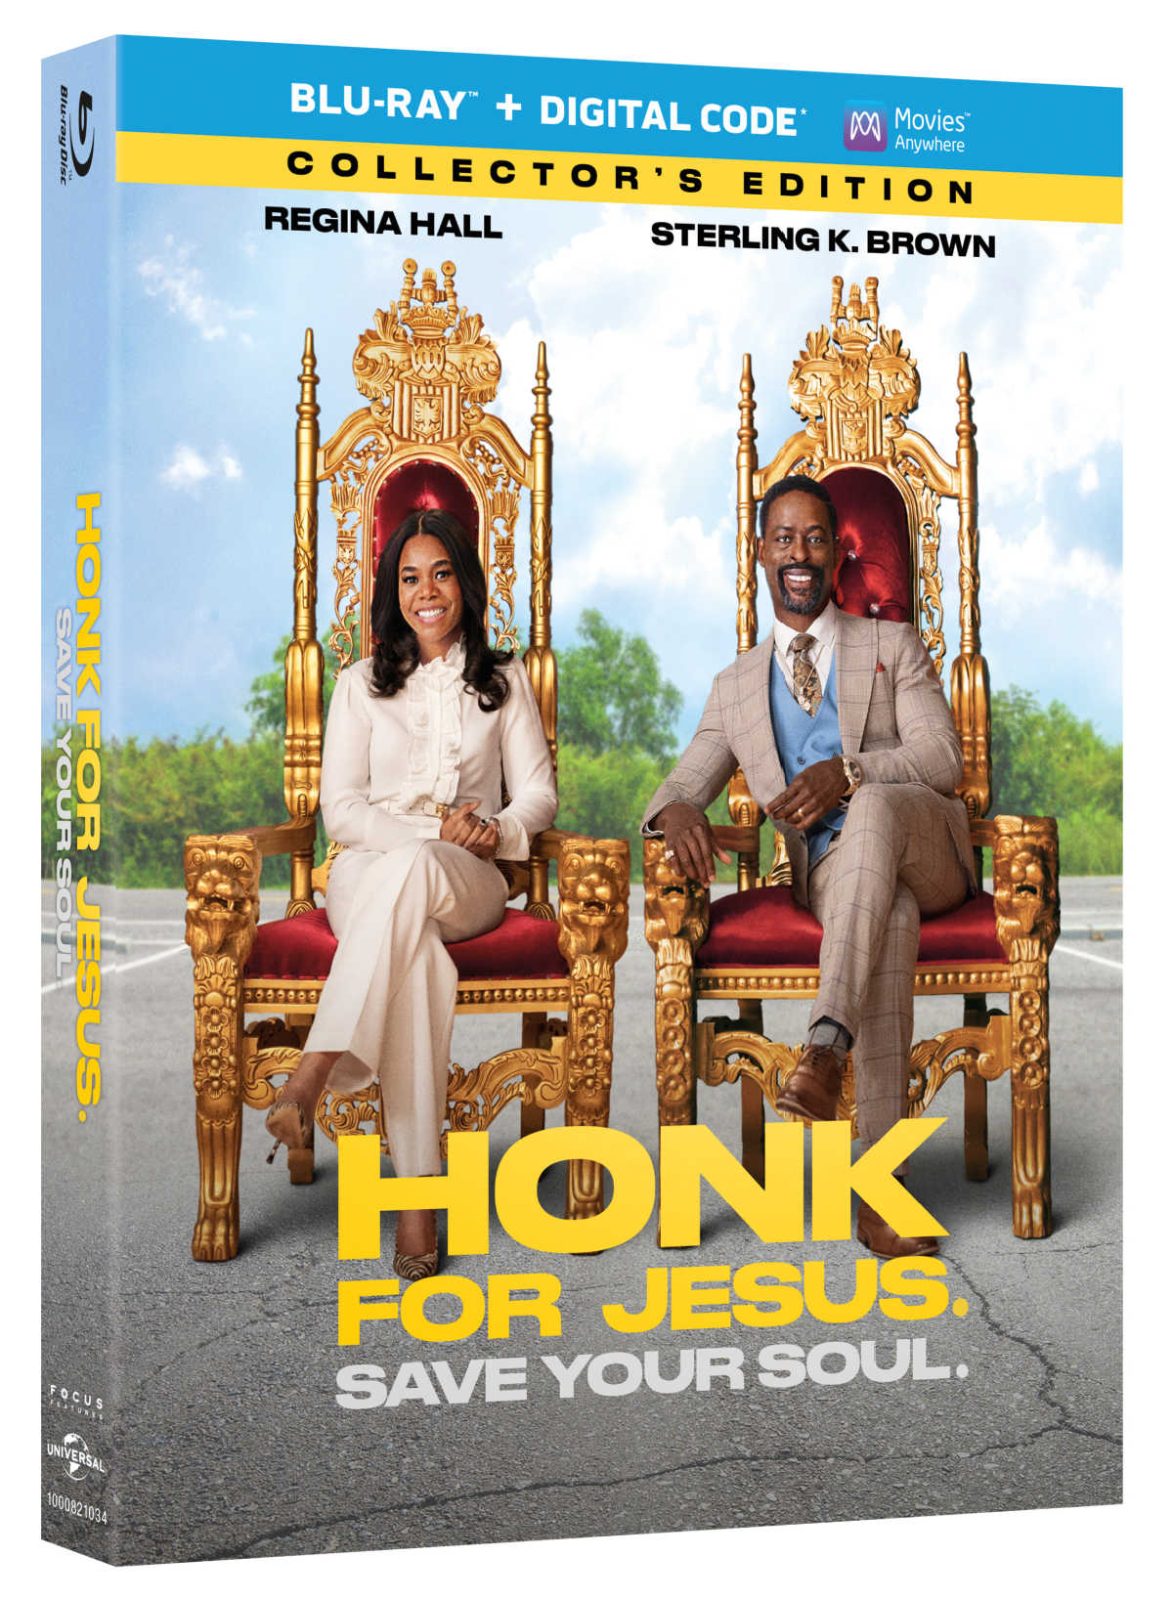 Honk for Jesus. Save Your Soul. is a movie that is great for laughs, but will also make you think about some serious issues. 